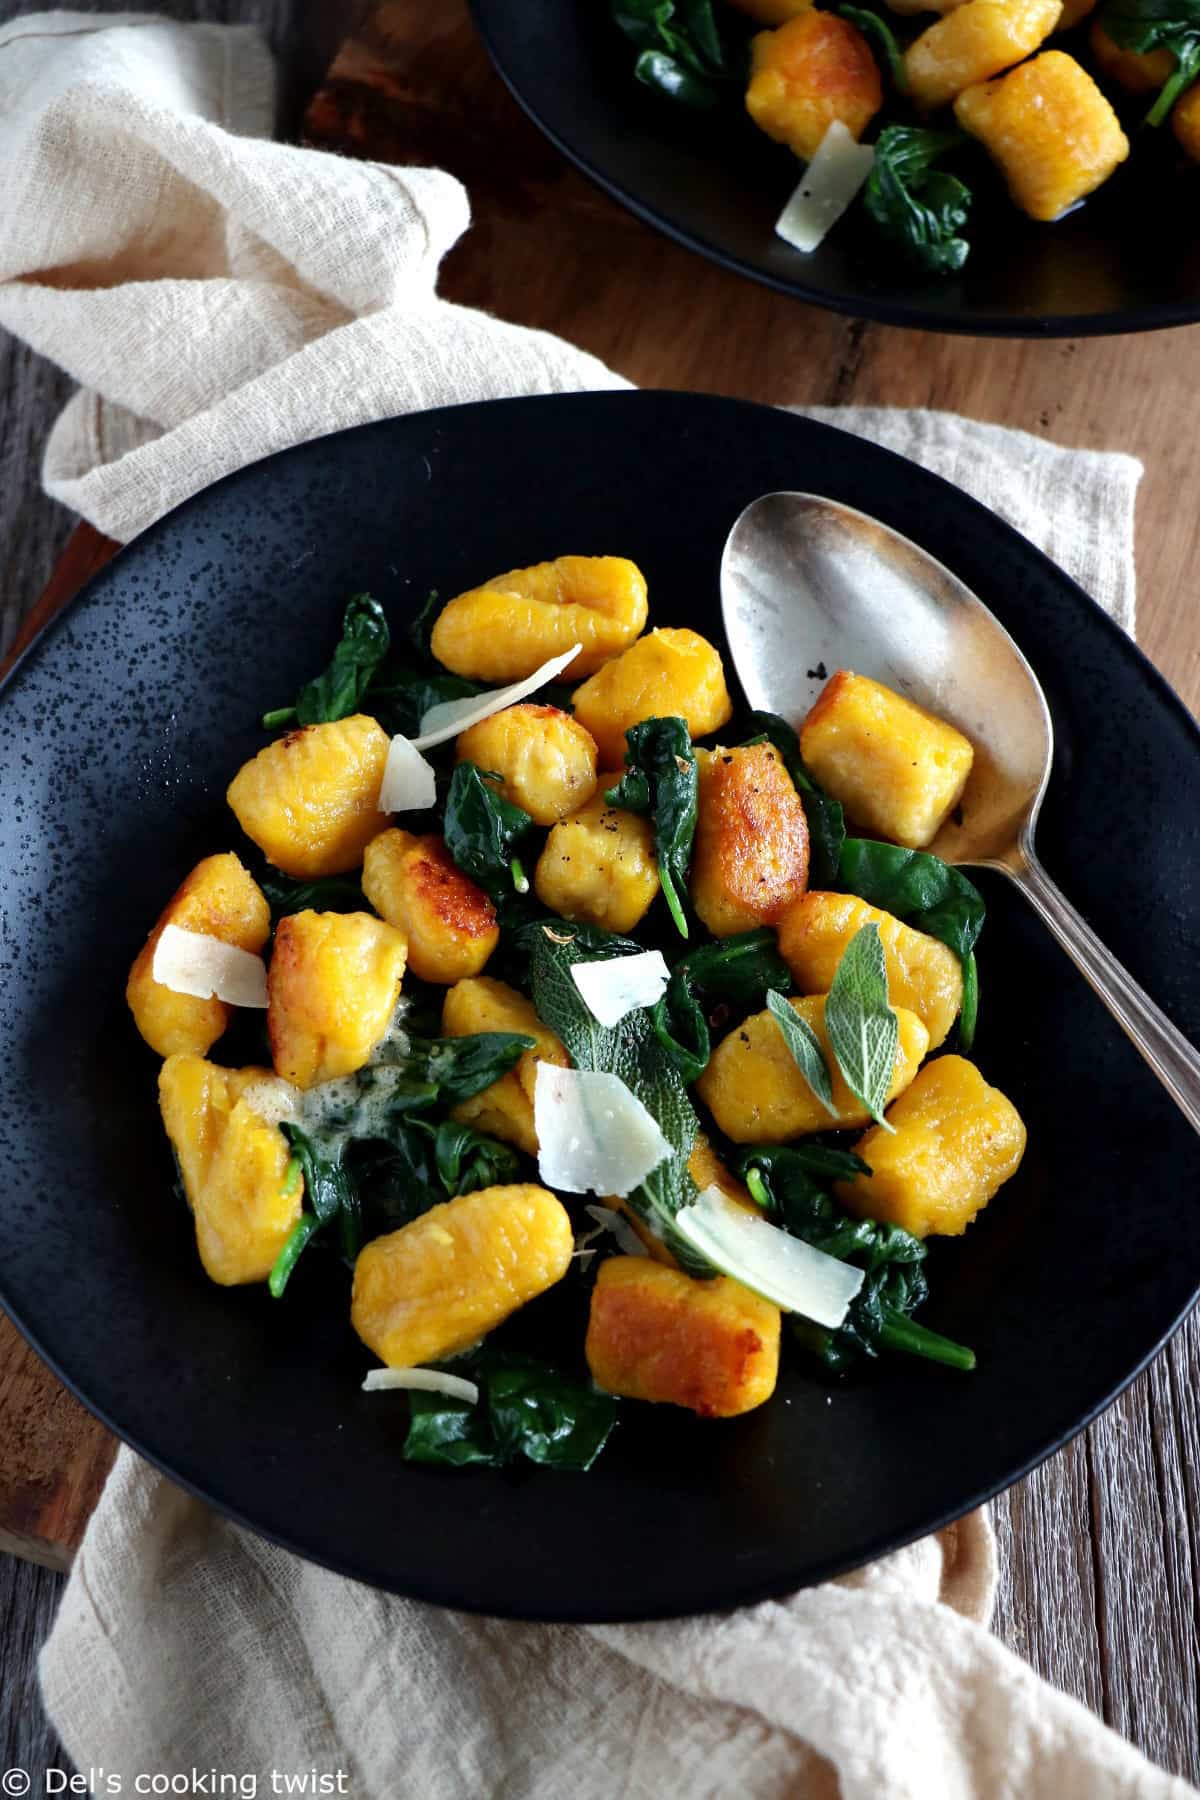 Learn how to make homemade butternut squash gnocchi from scratch with no effort. Serve with lemon butter sauce and you've got the perfect plant-based dish to impress your guests.